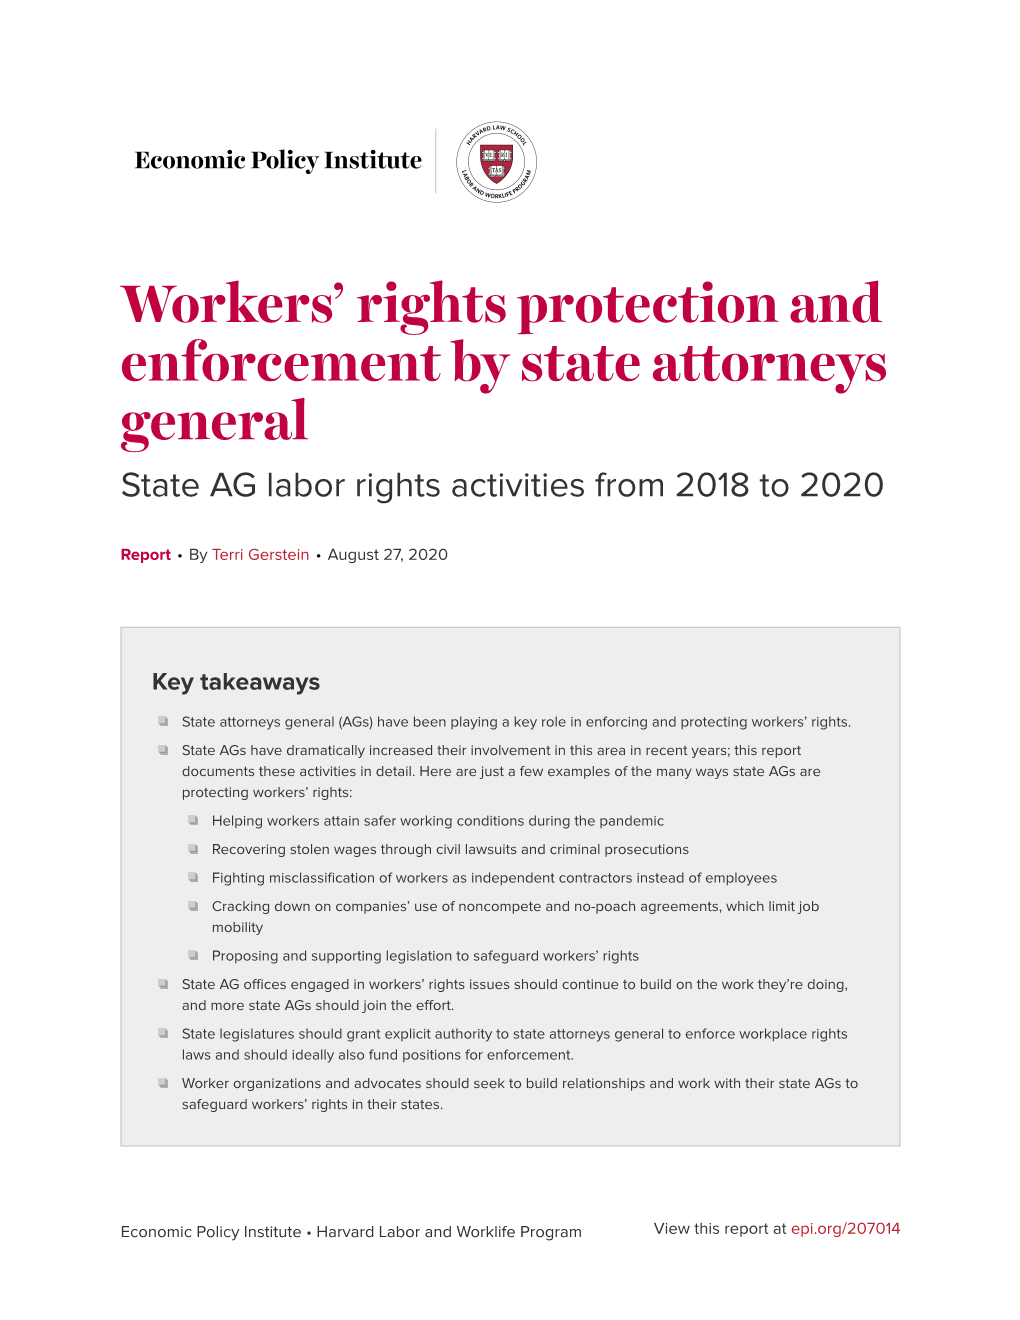 Workers' Rights Protection and Enforcement by State Attorneys General: State AG Labor Rights Activities from 2018 to 2020